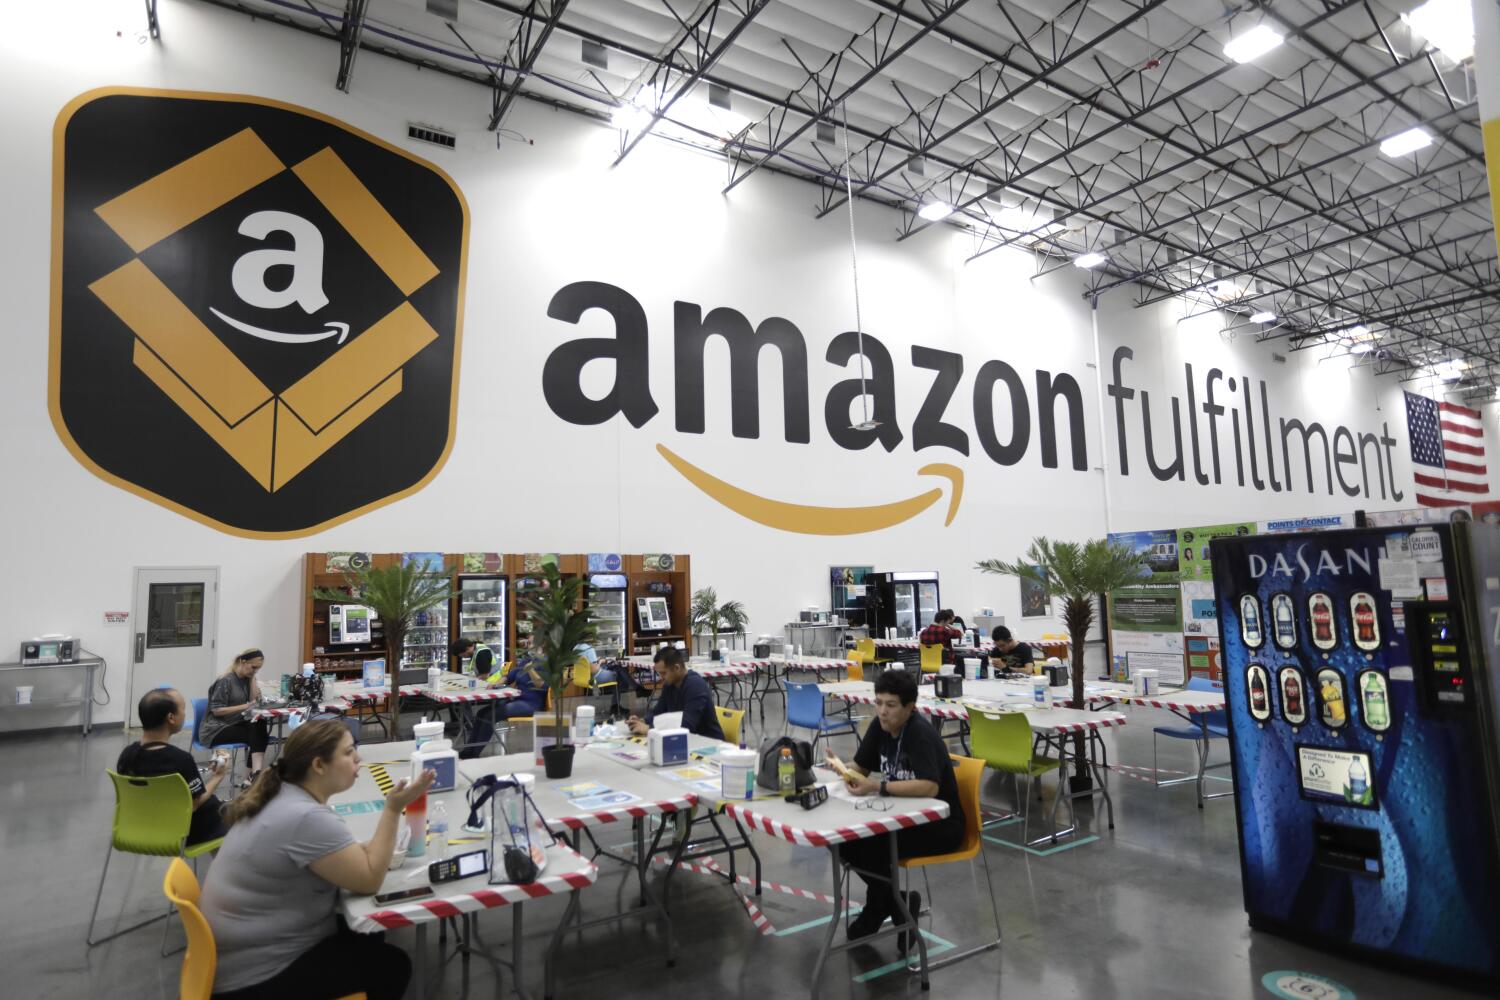 Amazon fined nearly $6 million for violations at Inland Empire warehouses